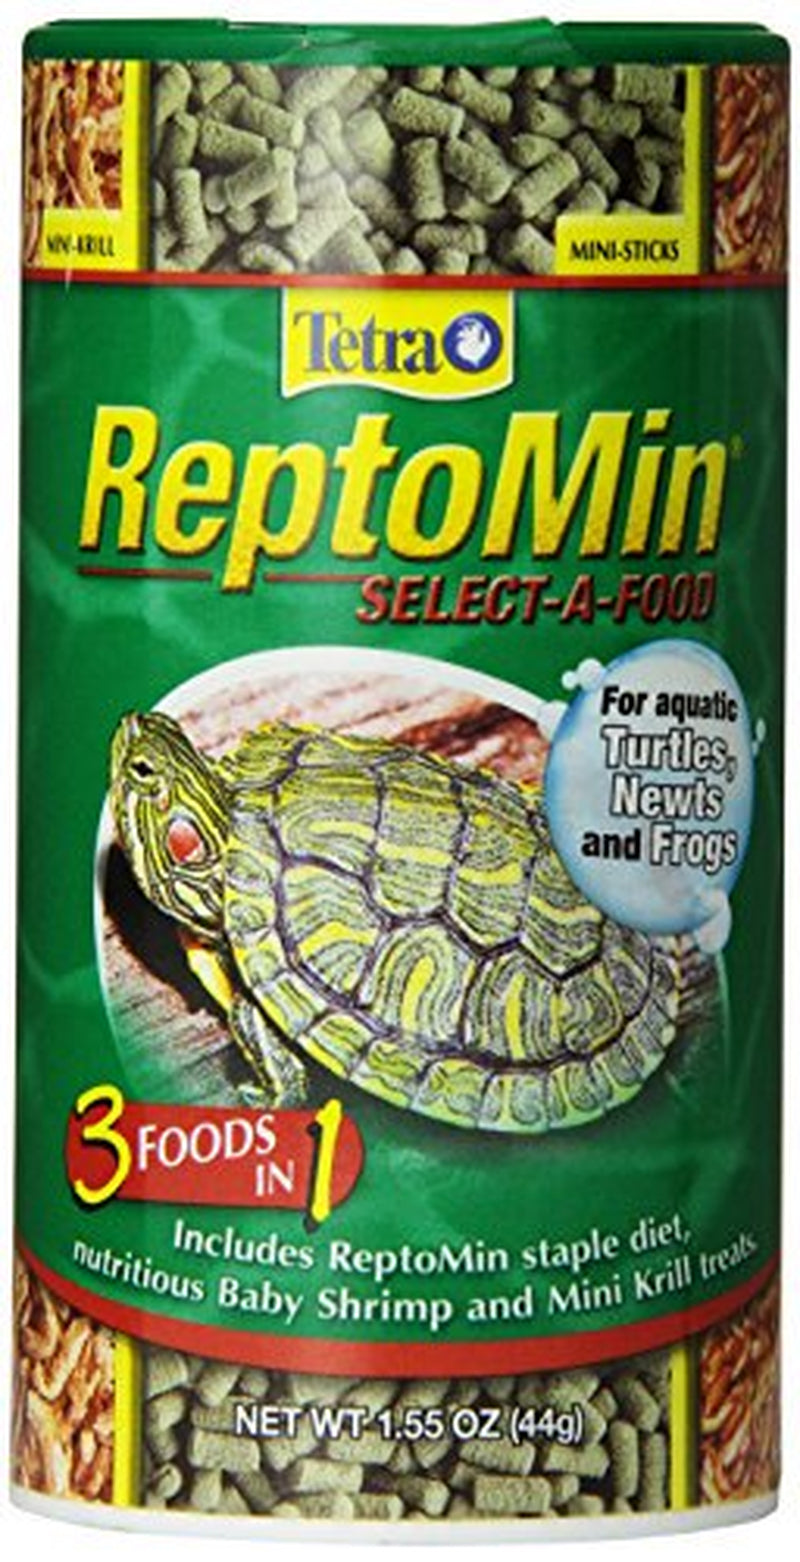 Tetra ReptoMin Floating Food Sticks for Aquatic Turtles, Newts and Frogs  2.64 Pound (Pack of 1)